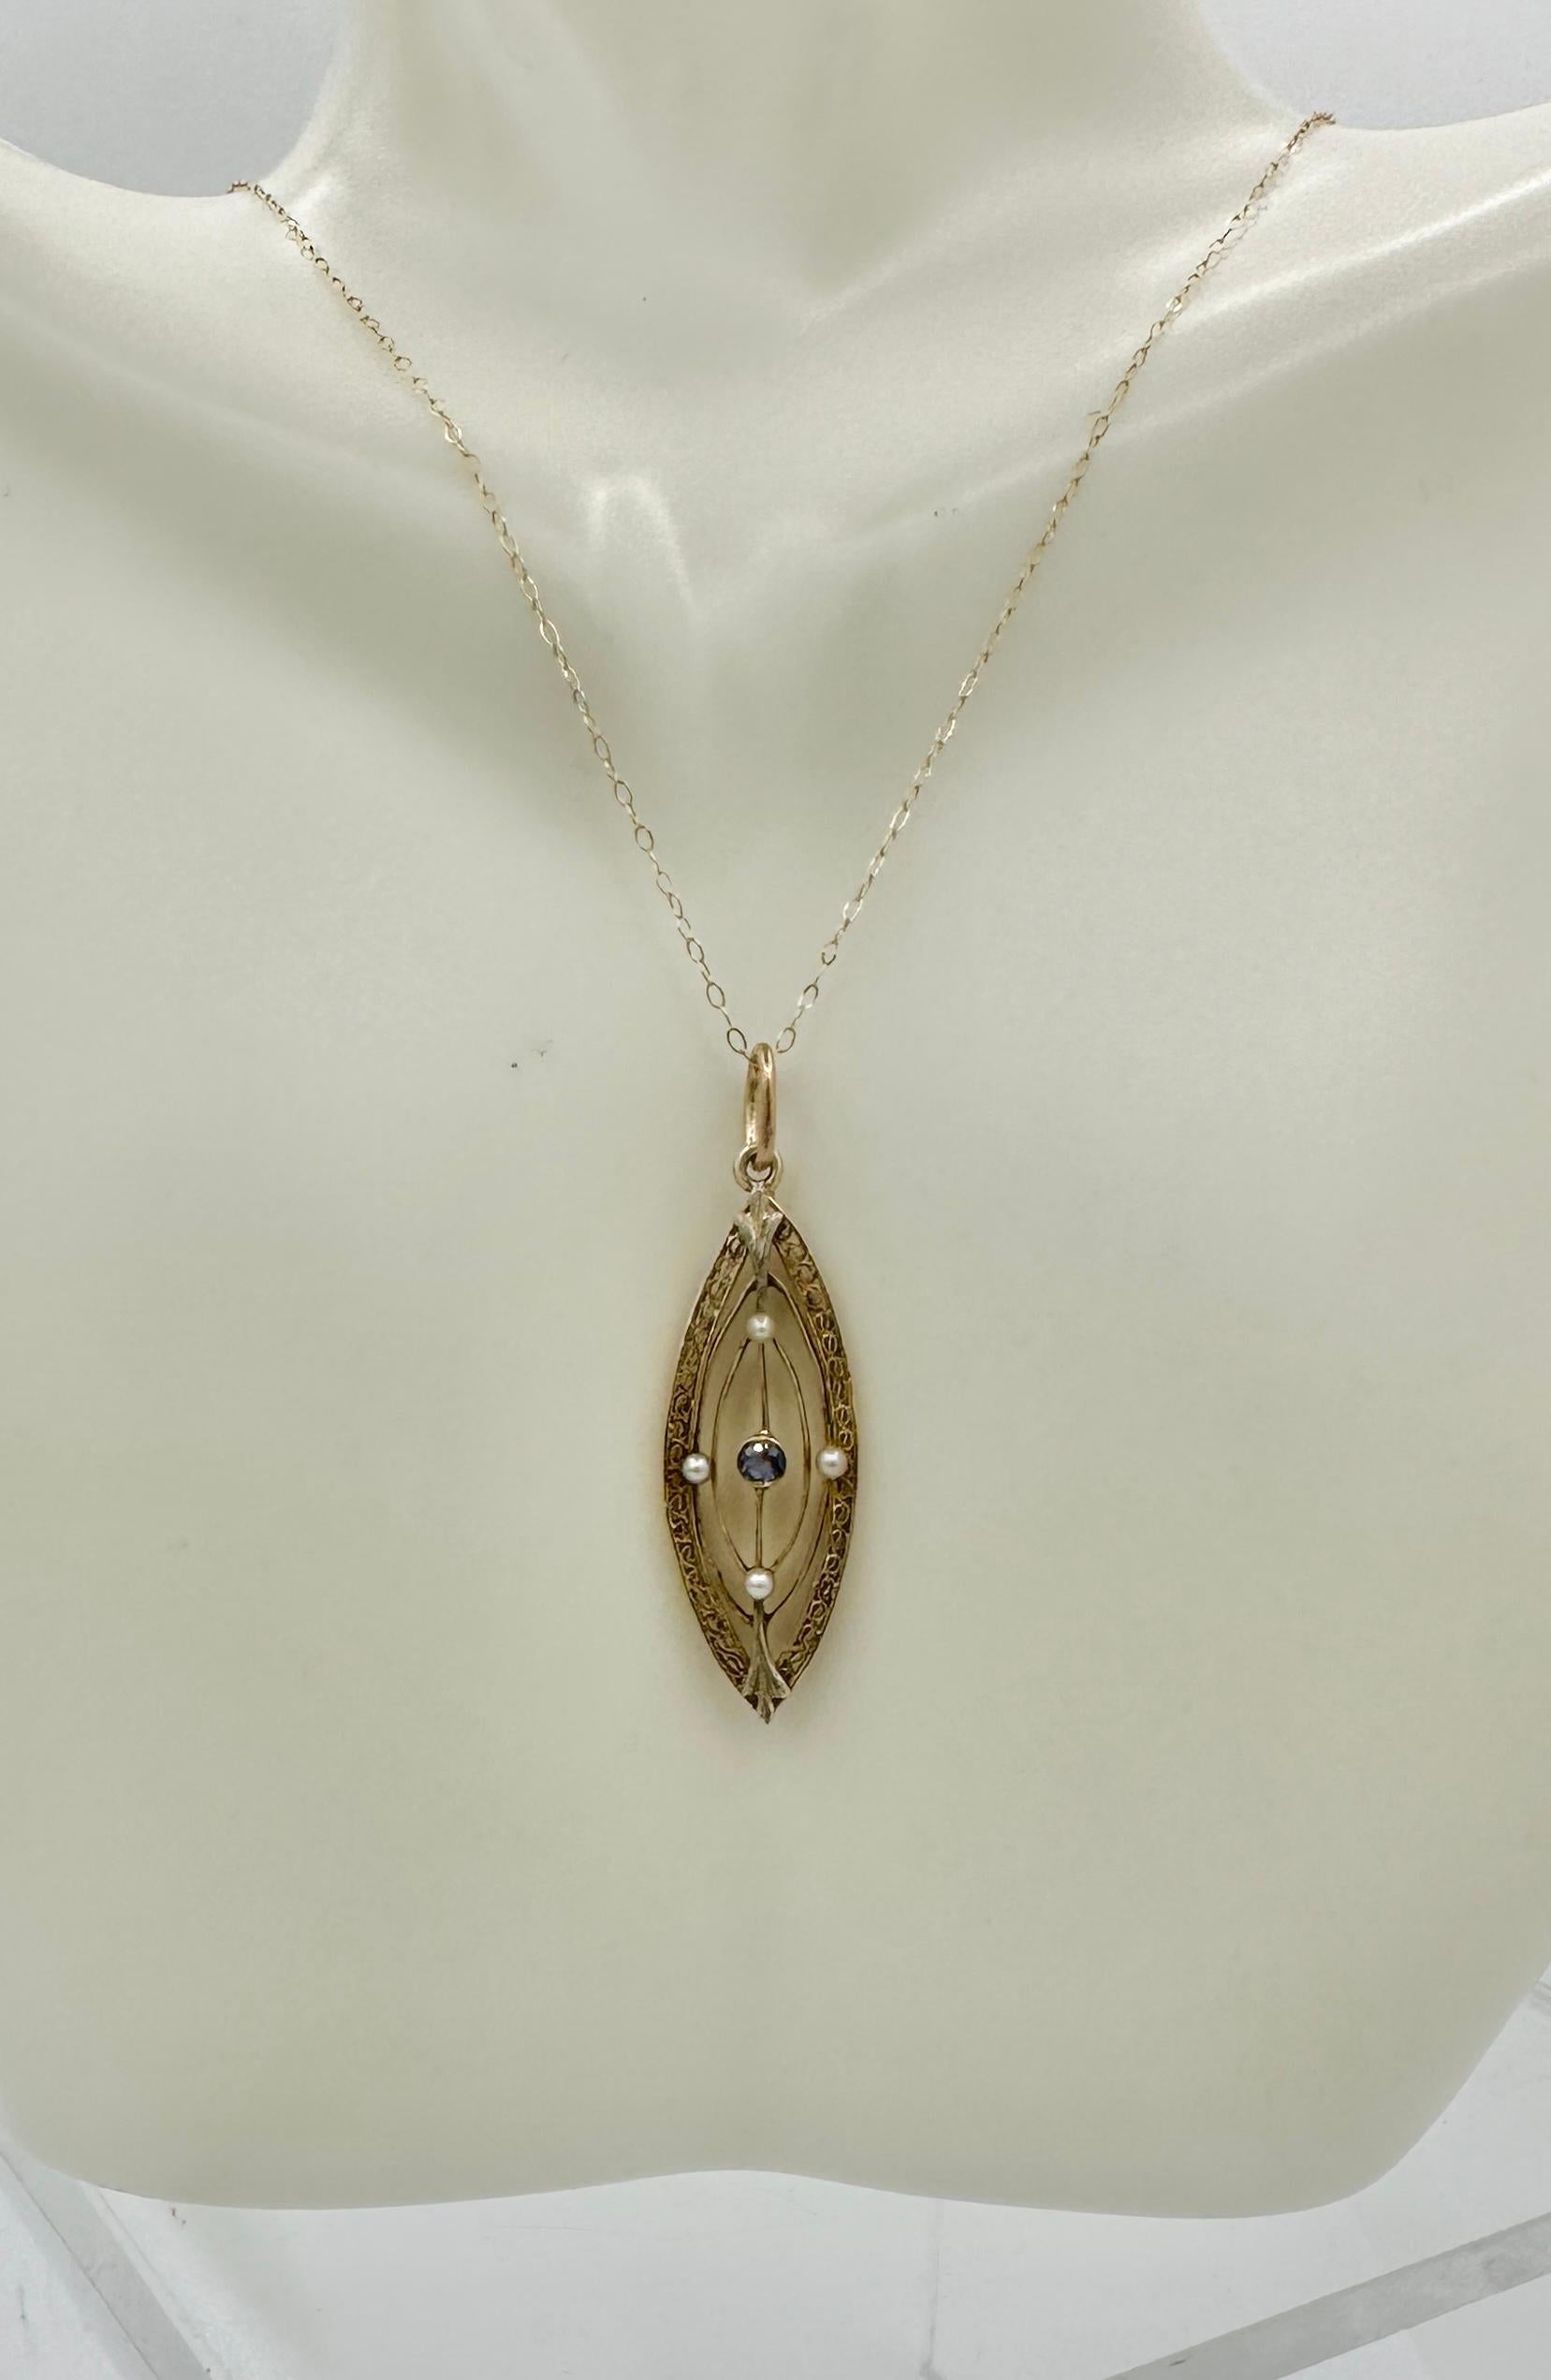 This is a beautiful Victorian - Art Deco Sapphire Pearl Lavaliere Pendant in 14 Karat Gold.   The lovely and delicate pendant is set with a beautiful round faceted Sapphire of a wonderful blue color.   The sapphire is set within a knife edge design